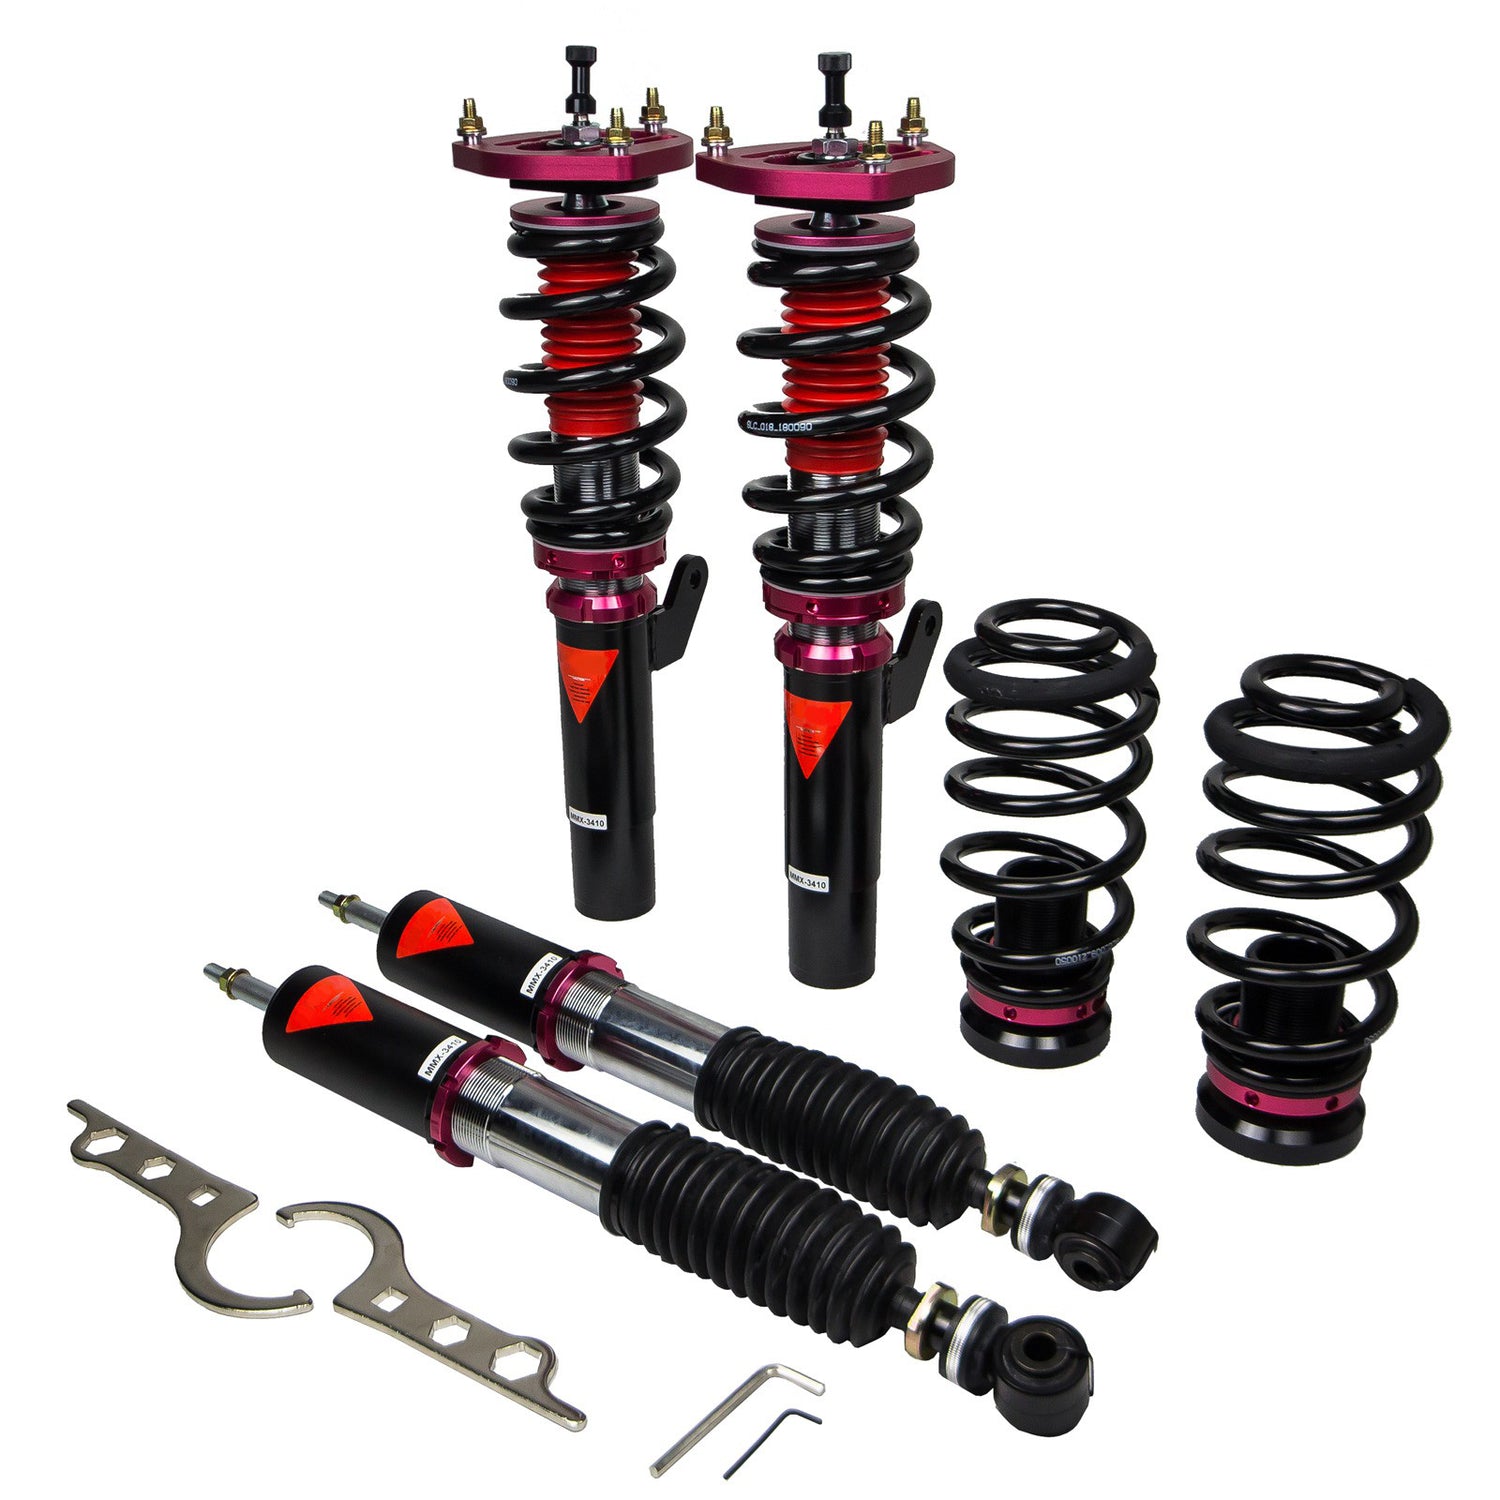 MMX3420-A MAXX Coilovers Lowering Kit, Fully Adjustable, Ride Height, 40 Clicks Rebound Settings, Volkswagen Golf(MK6) 10-14(2WD)